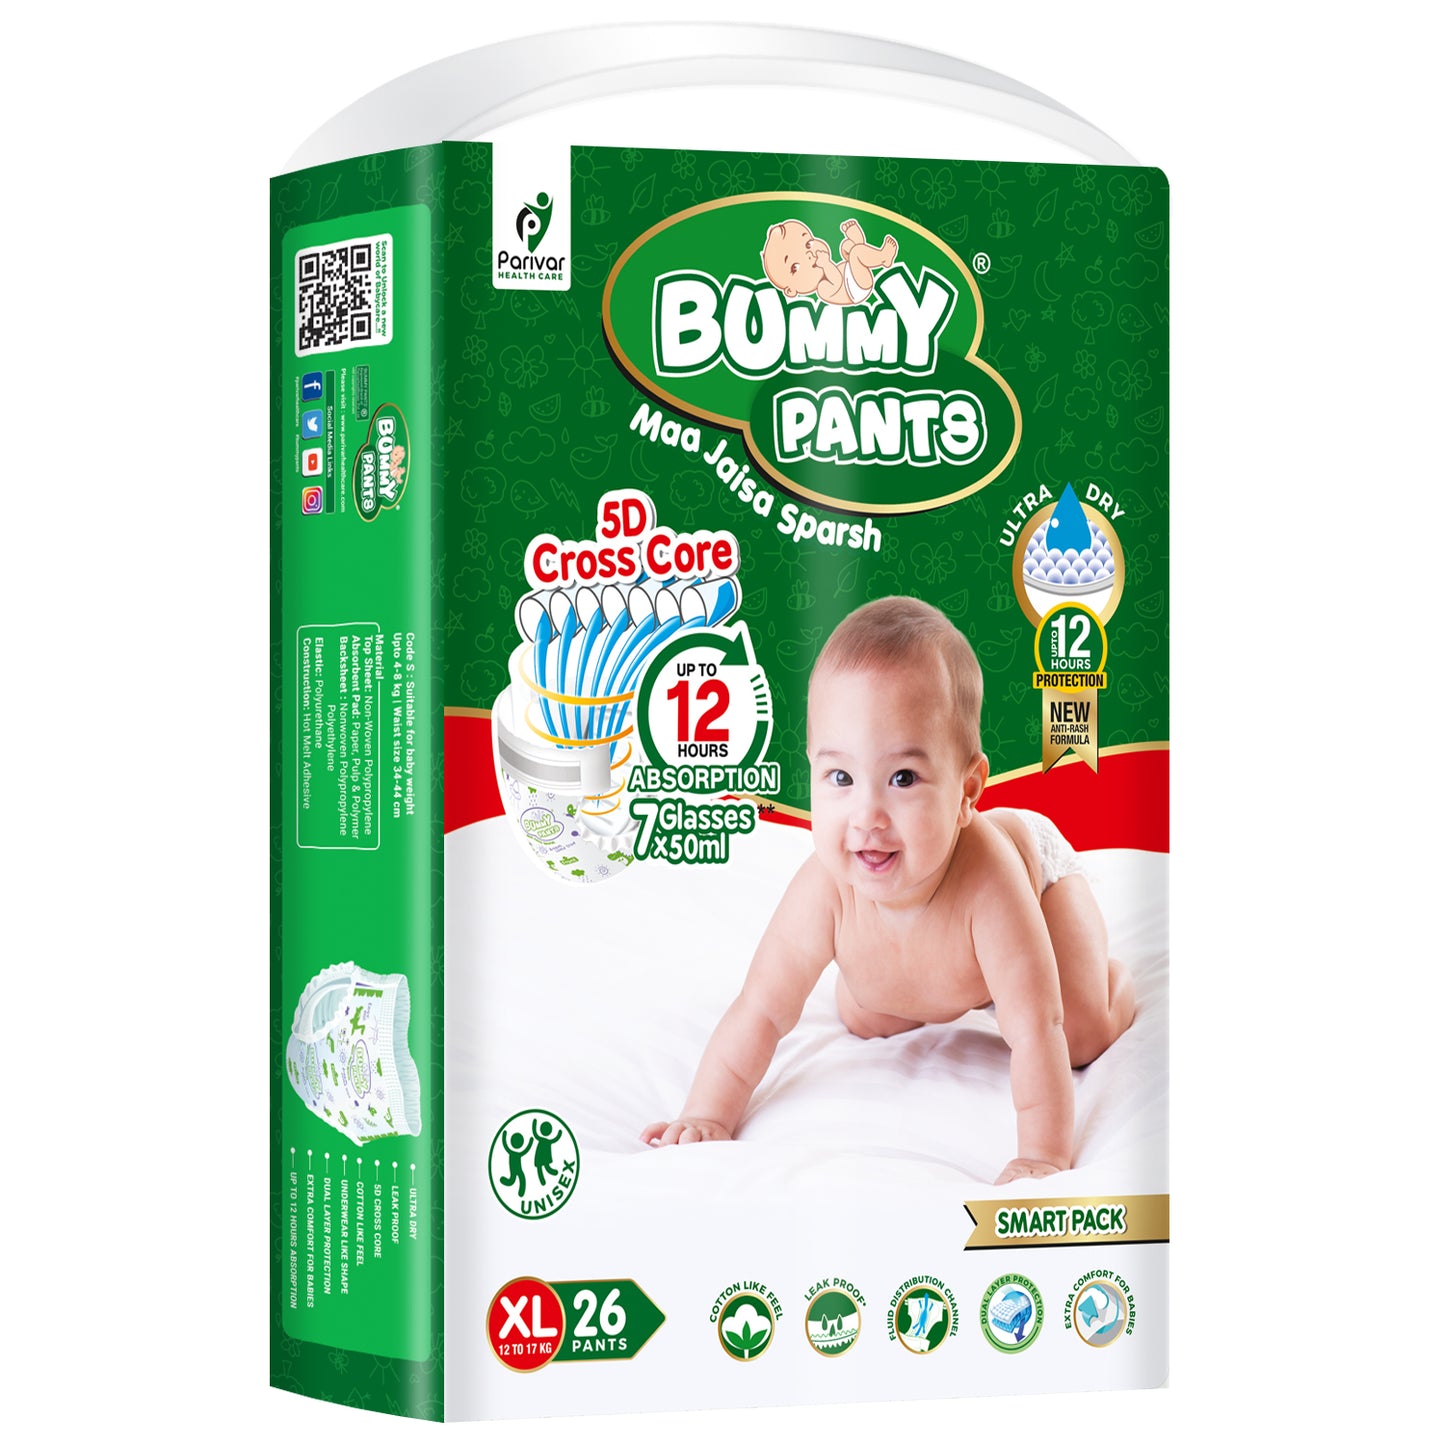 Baby Diaper in XL size, 26 Count, 5D Core, Anti-Rash Layer, 12-17kg